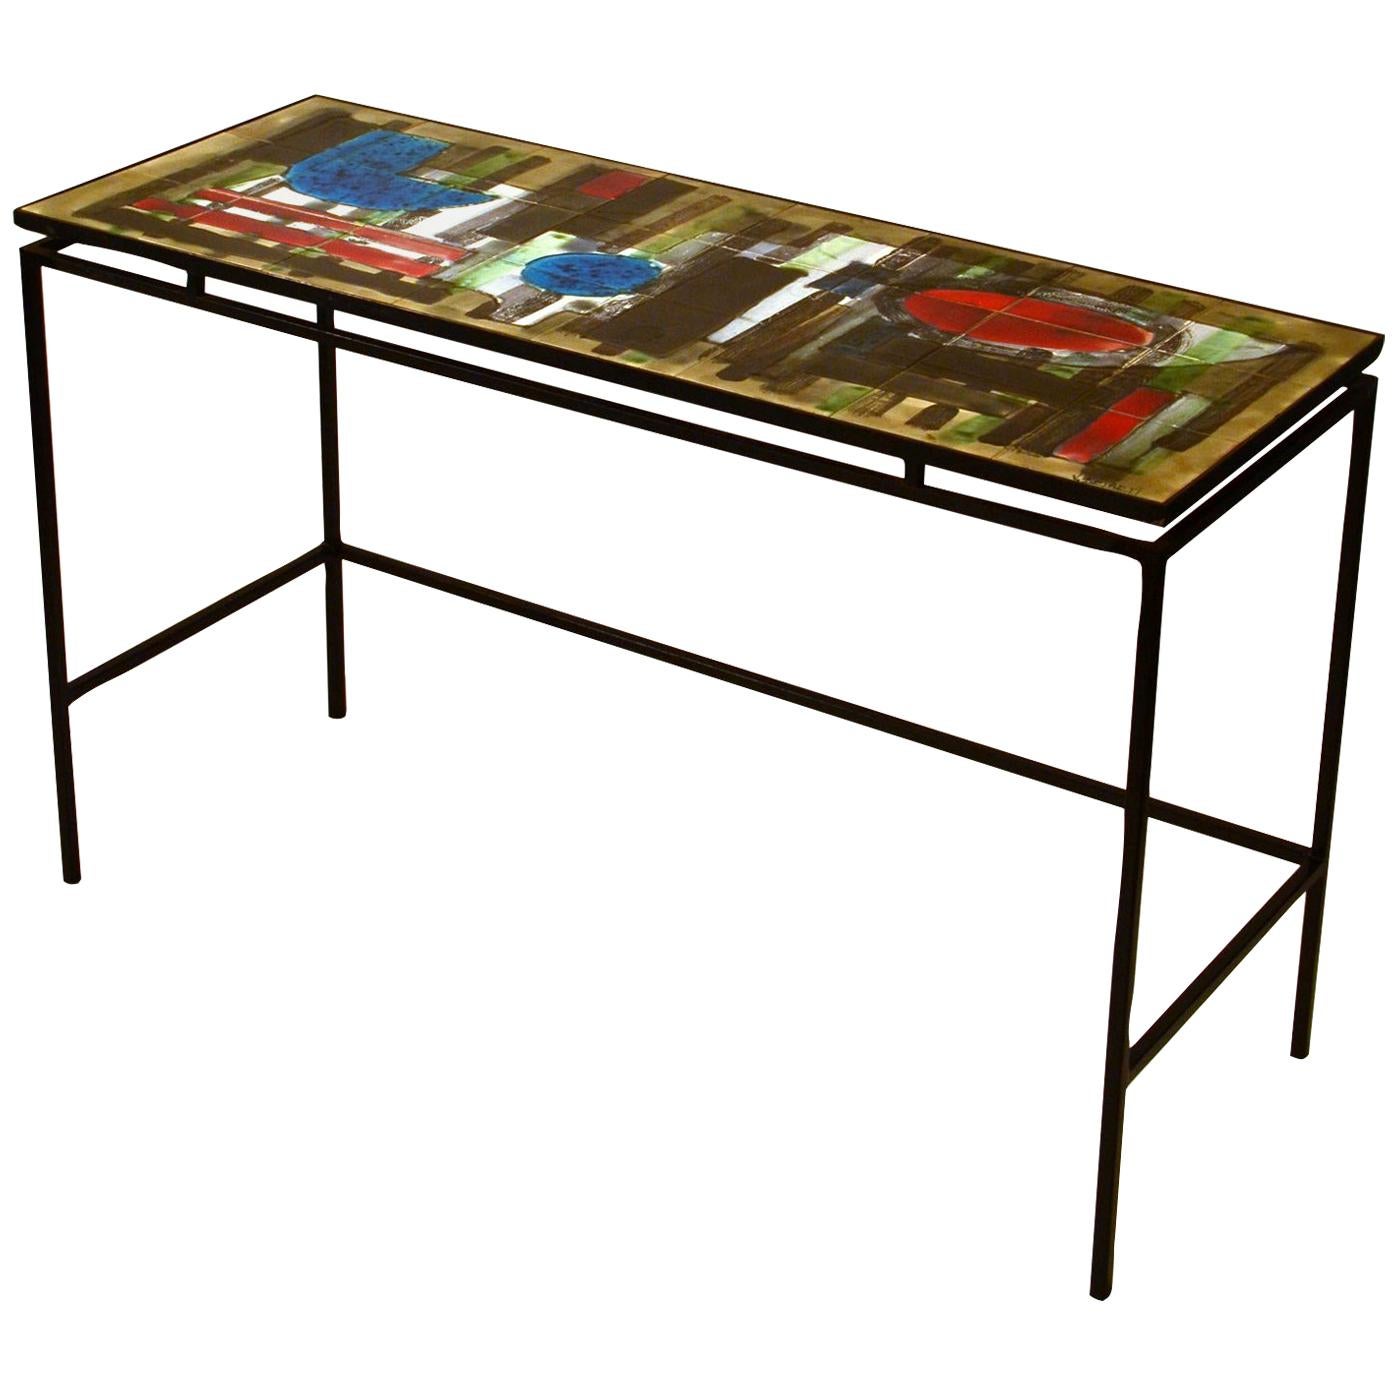 Hand Painted Ceramic Tile Console or Desk on Metal Frame by Belarti